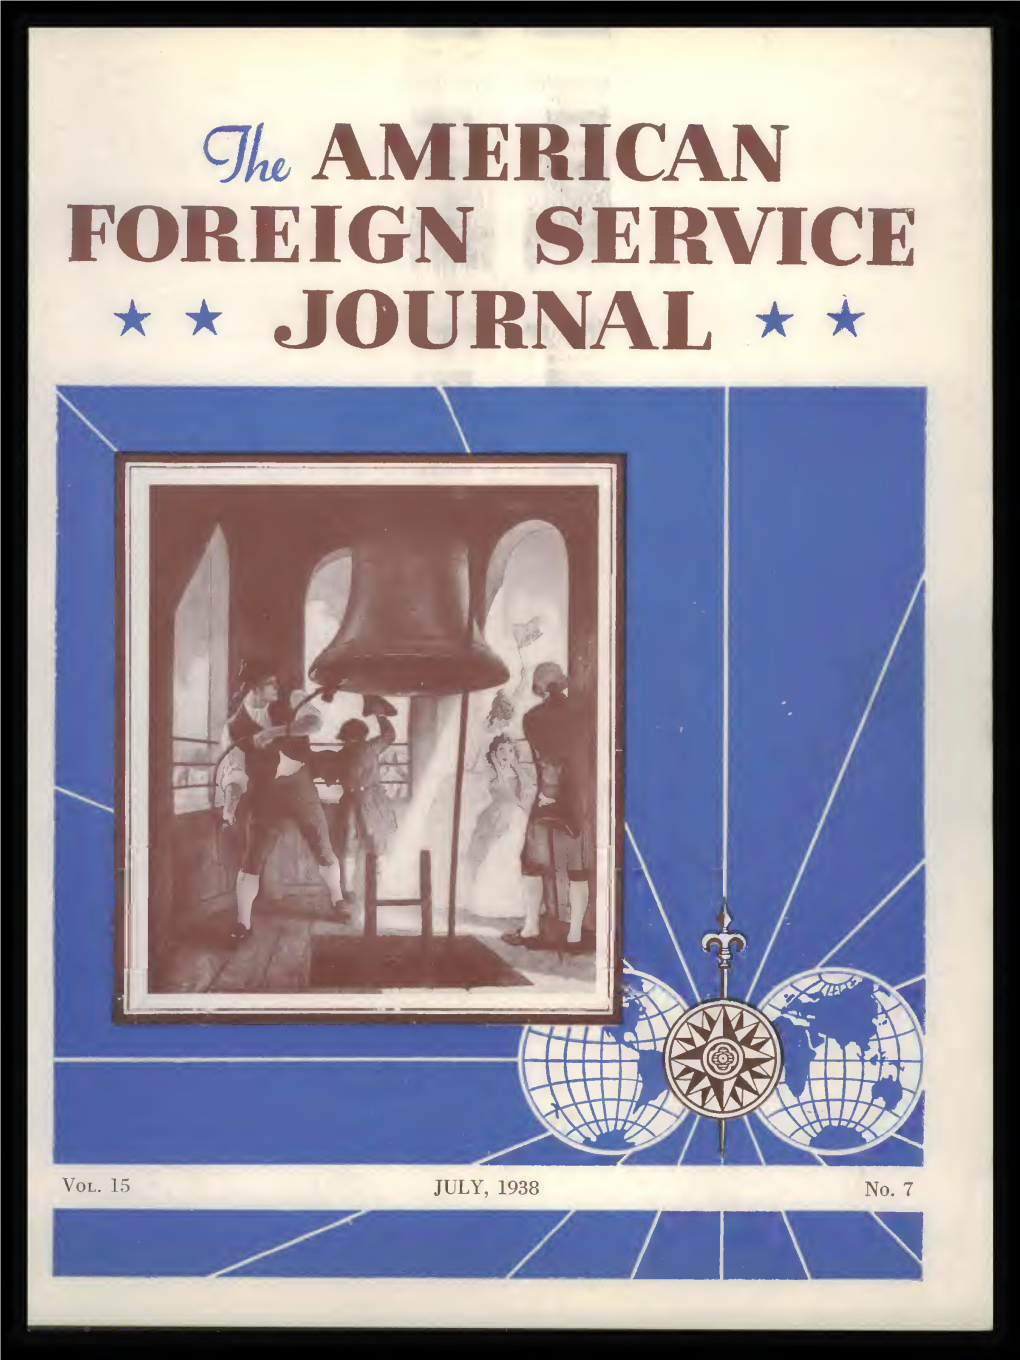 The Foreign Service Journal, July 1938